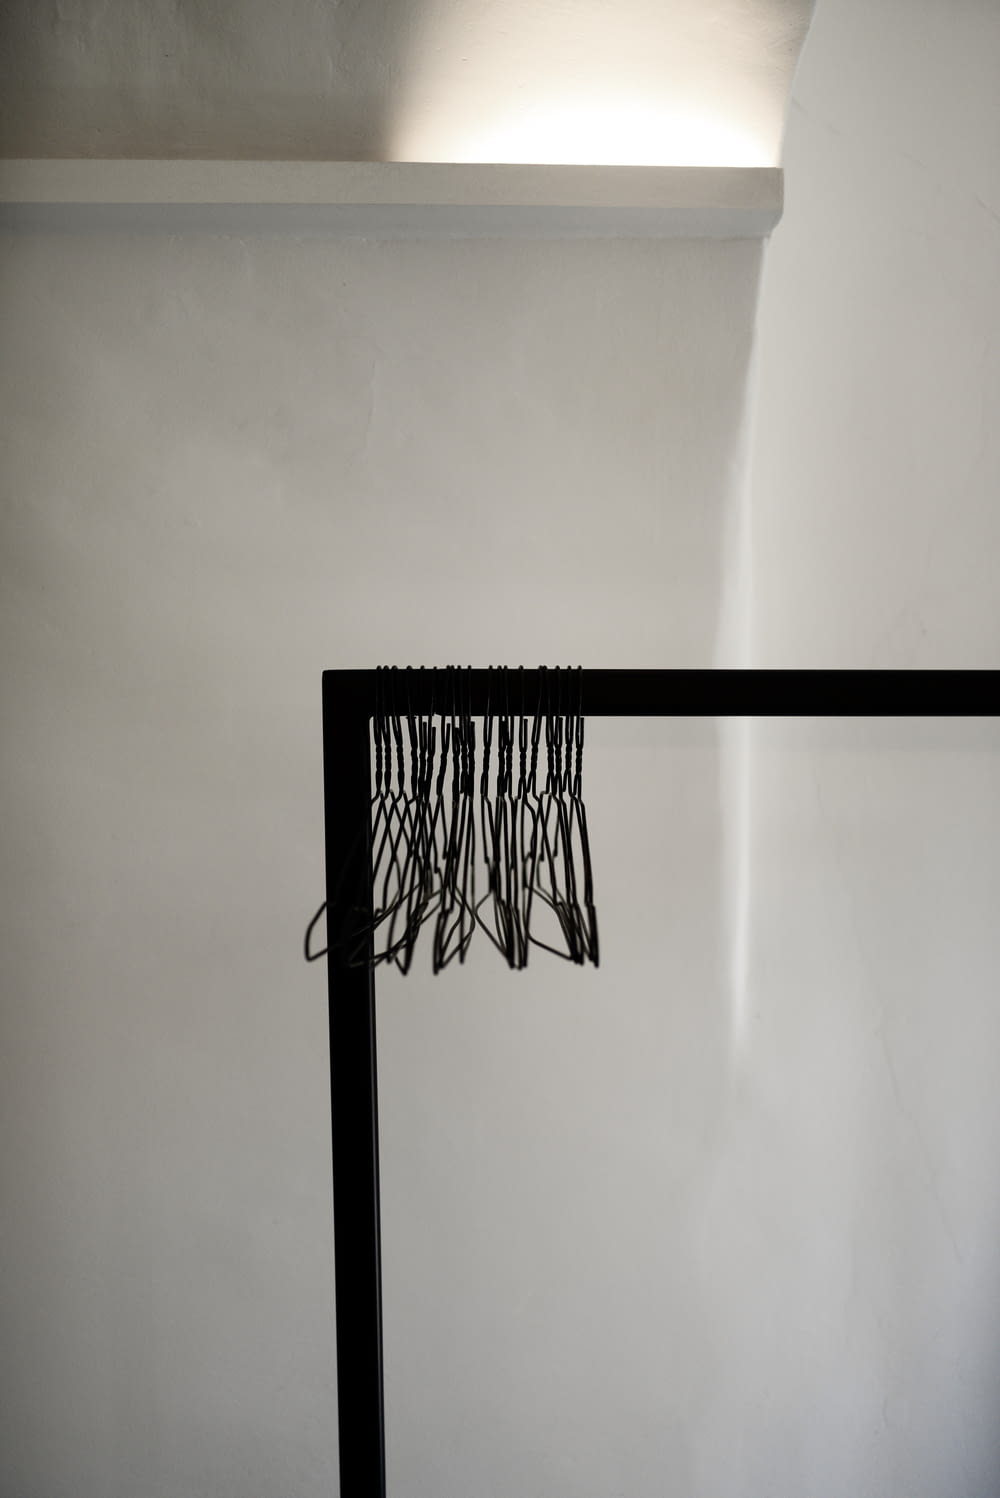 clothes hangers on clothes rack